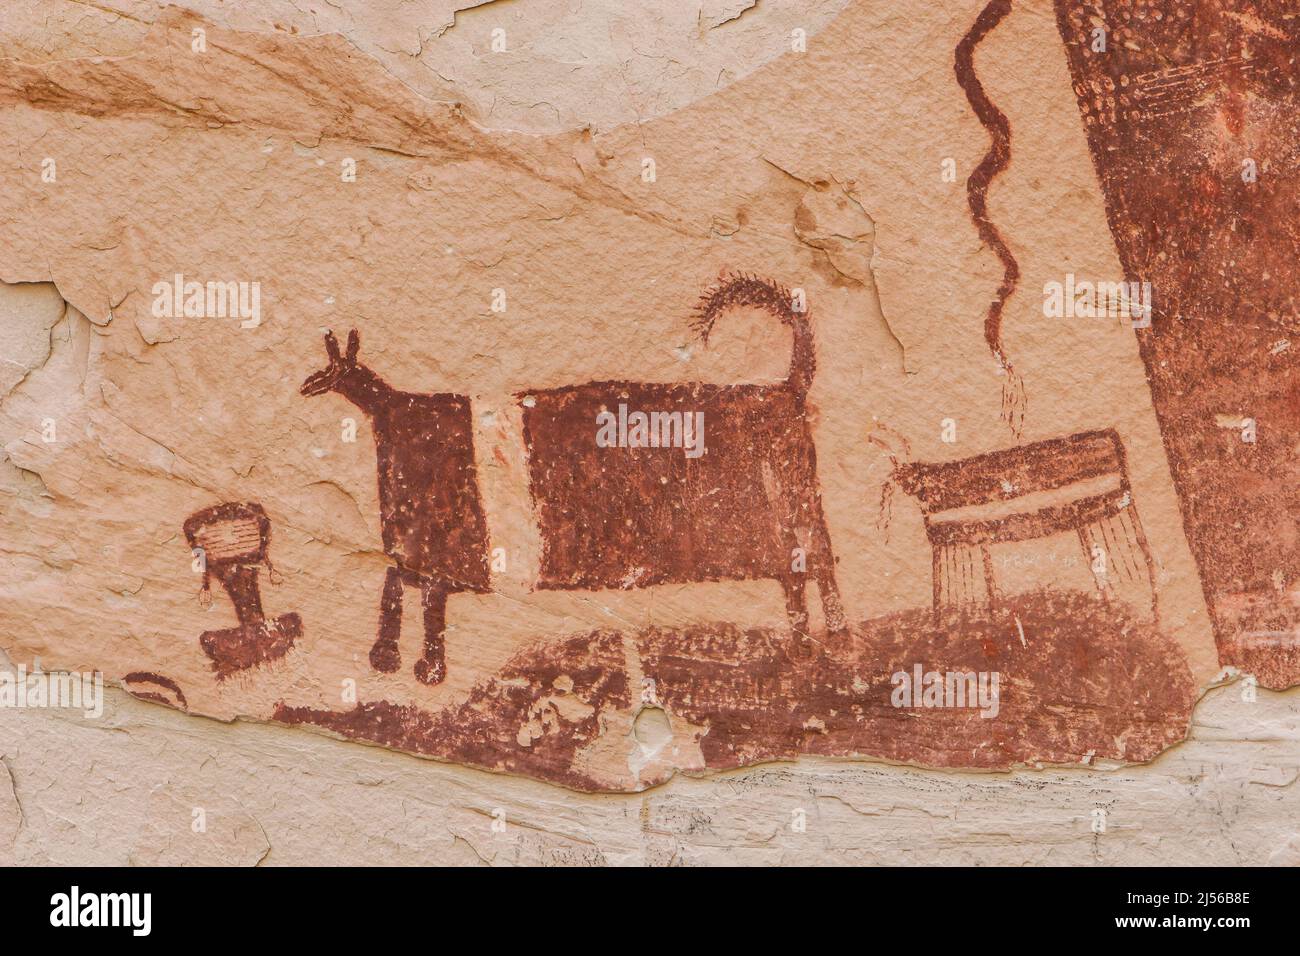 The Temple Mountain pictograph panel, on  the San Rafael Swell in Utah, is an example of Barrier Canyon-style rock art and was painted by the Archaic Stock Photo